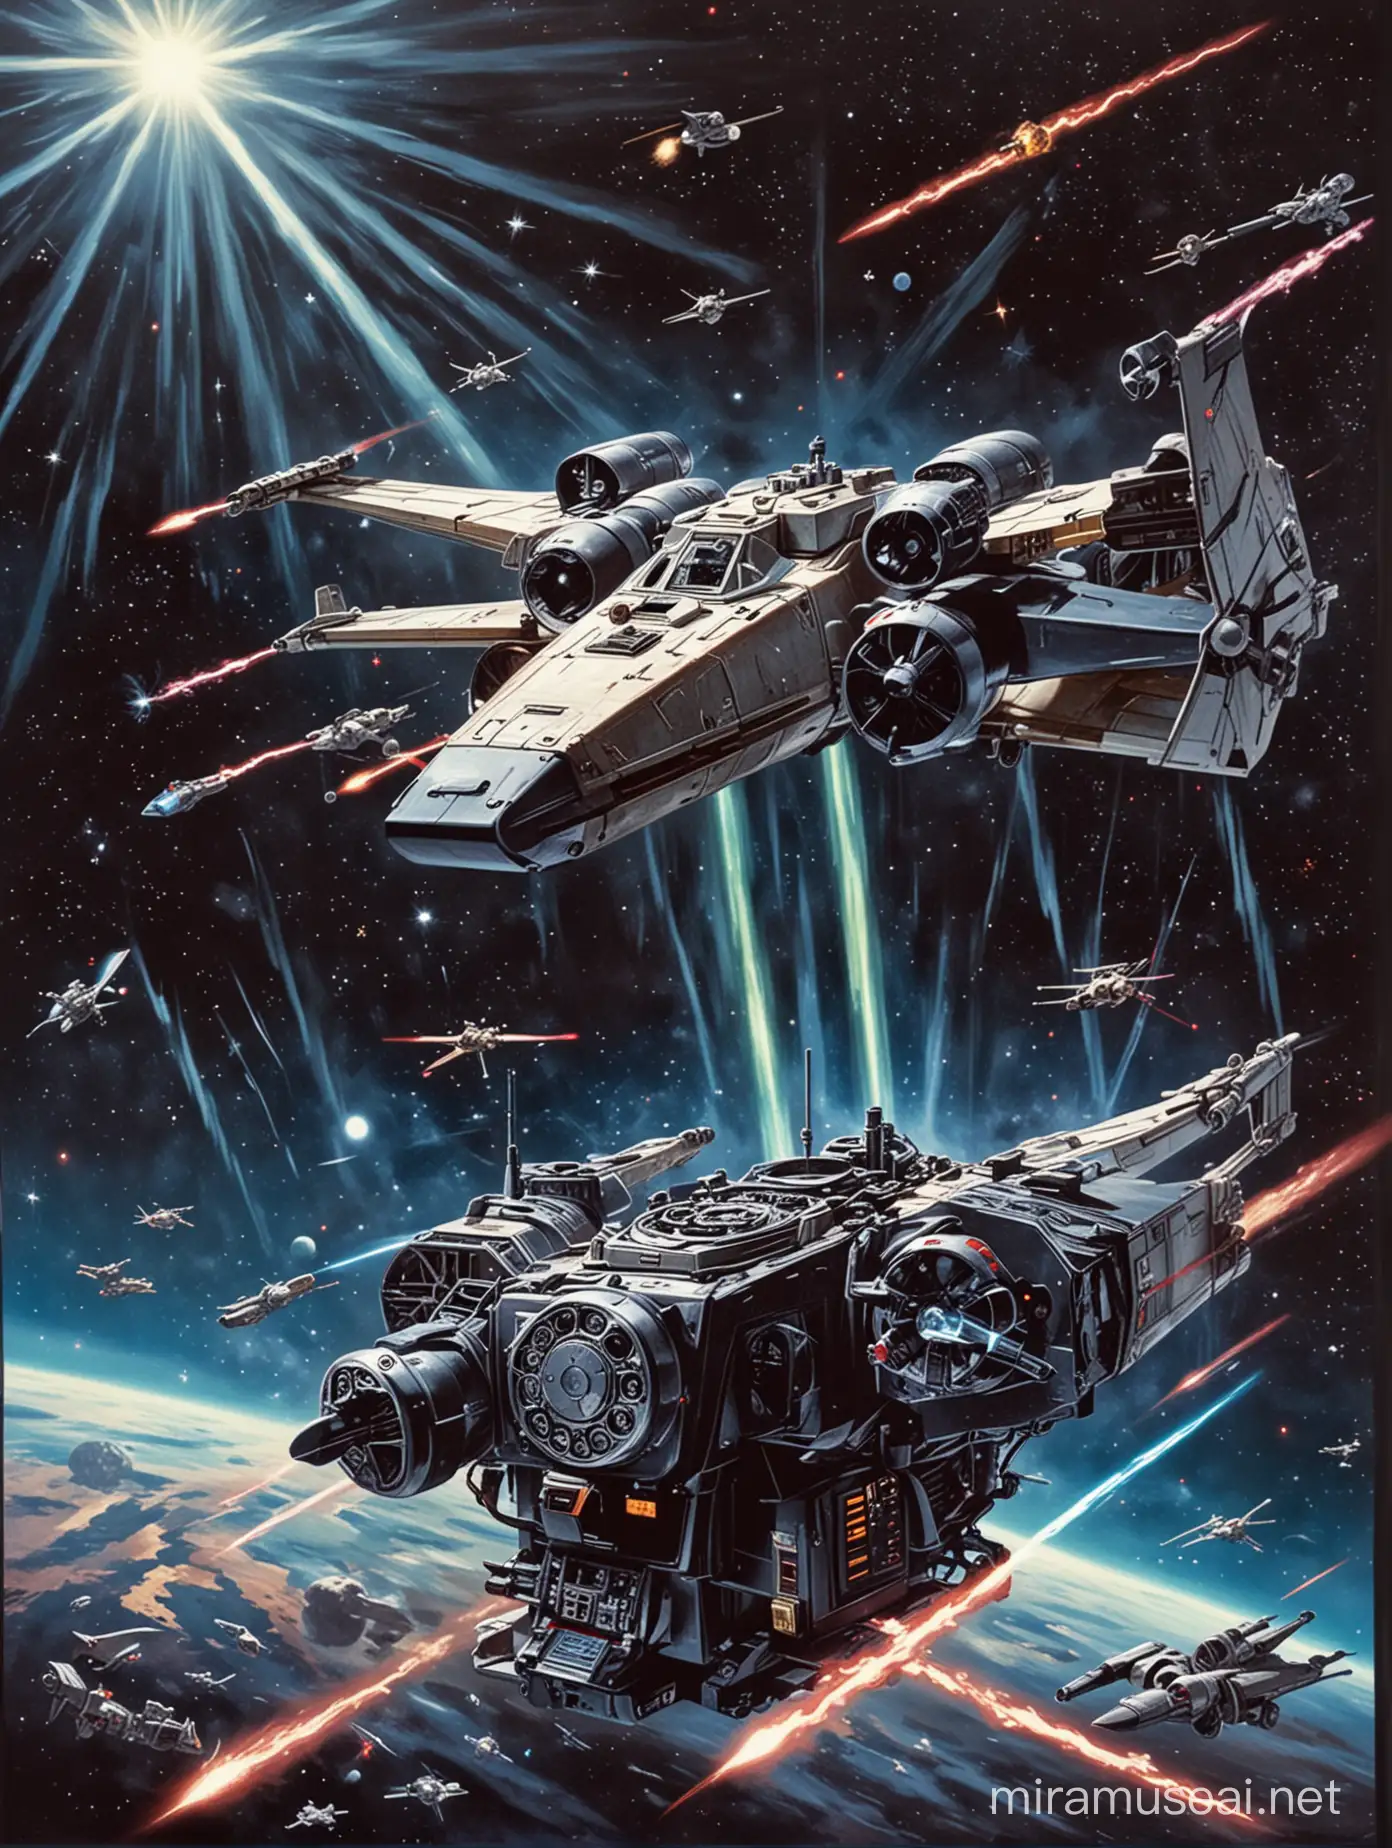 Space Battle with XWings and LaserShooting Telephone Vintage Star Wars Movie Poster